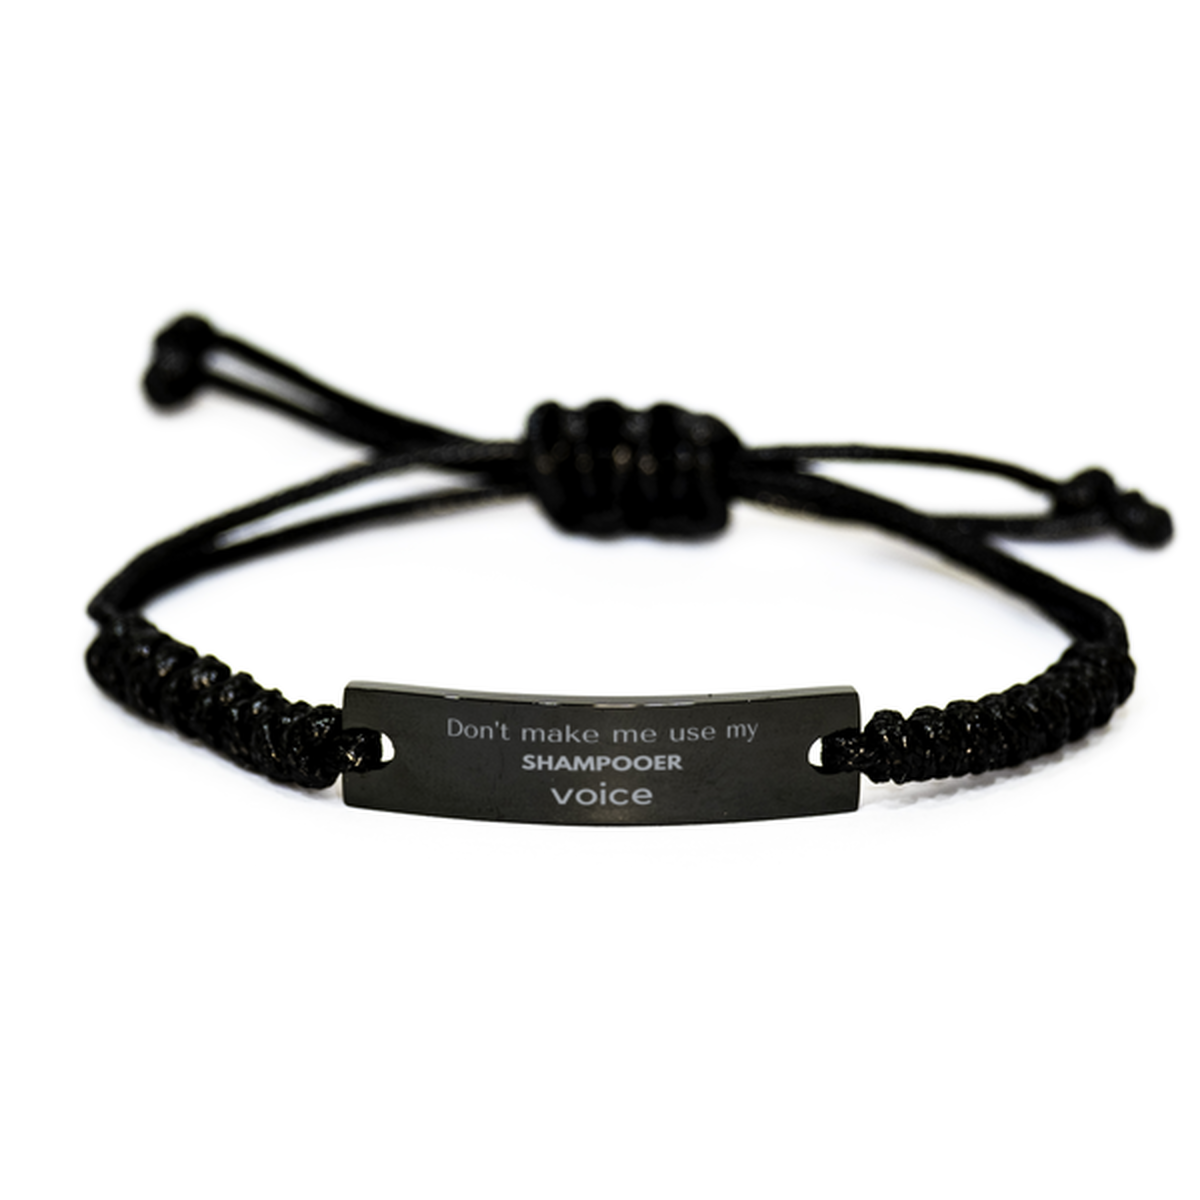 Don't make me use my Shampooer voice, Sarcasm Shampooer Gifts, Christmas Shampooer Black Rope Bracelet Birthday Unique Gifts For Shampooer Coworkers, Men, Women, Colleague, Friends